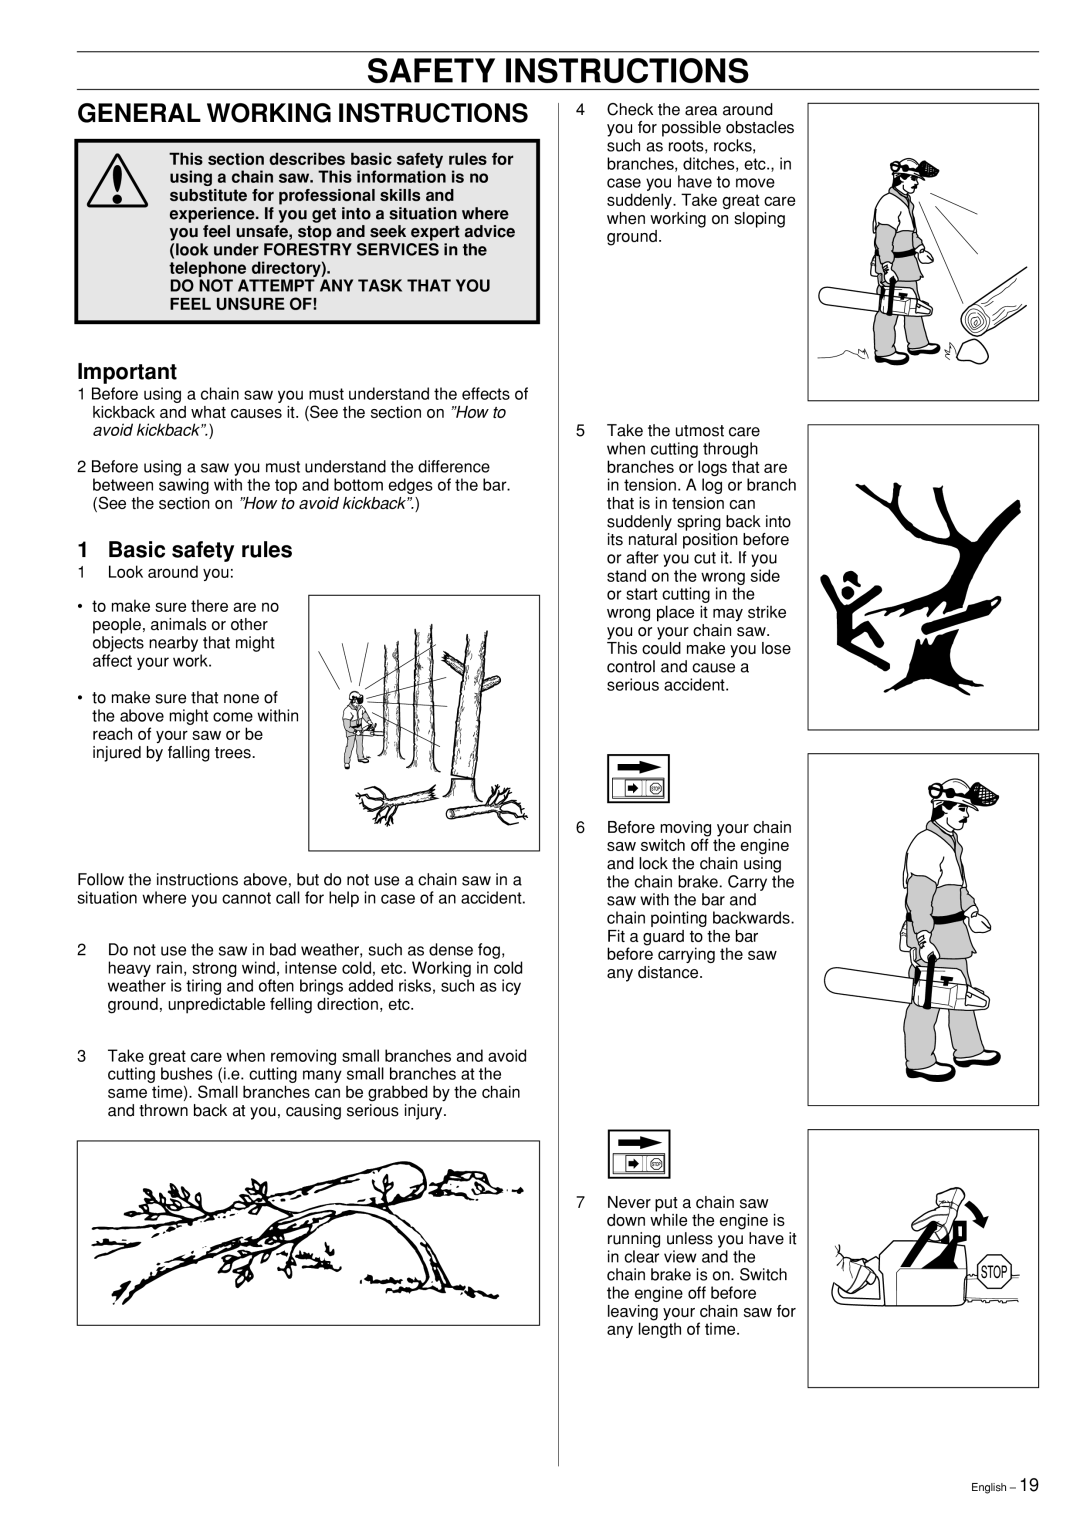 Husqvarna 55 Rancher manual Safety Instructions, General Working Instructions, Basic safety rules 